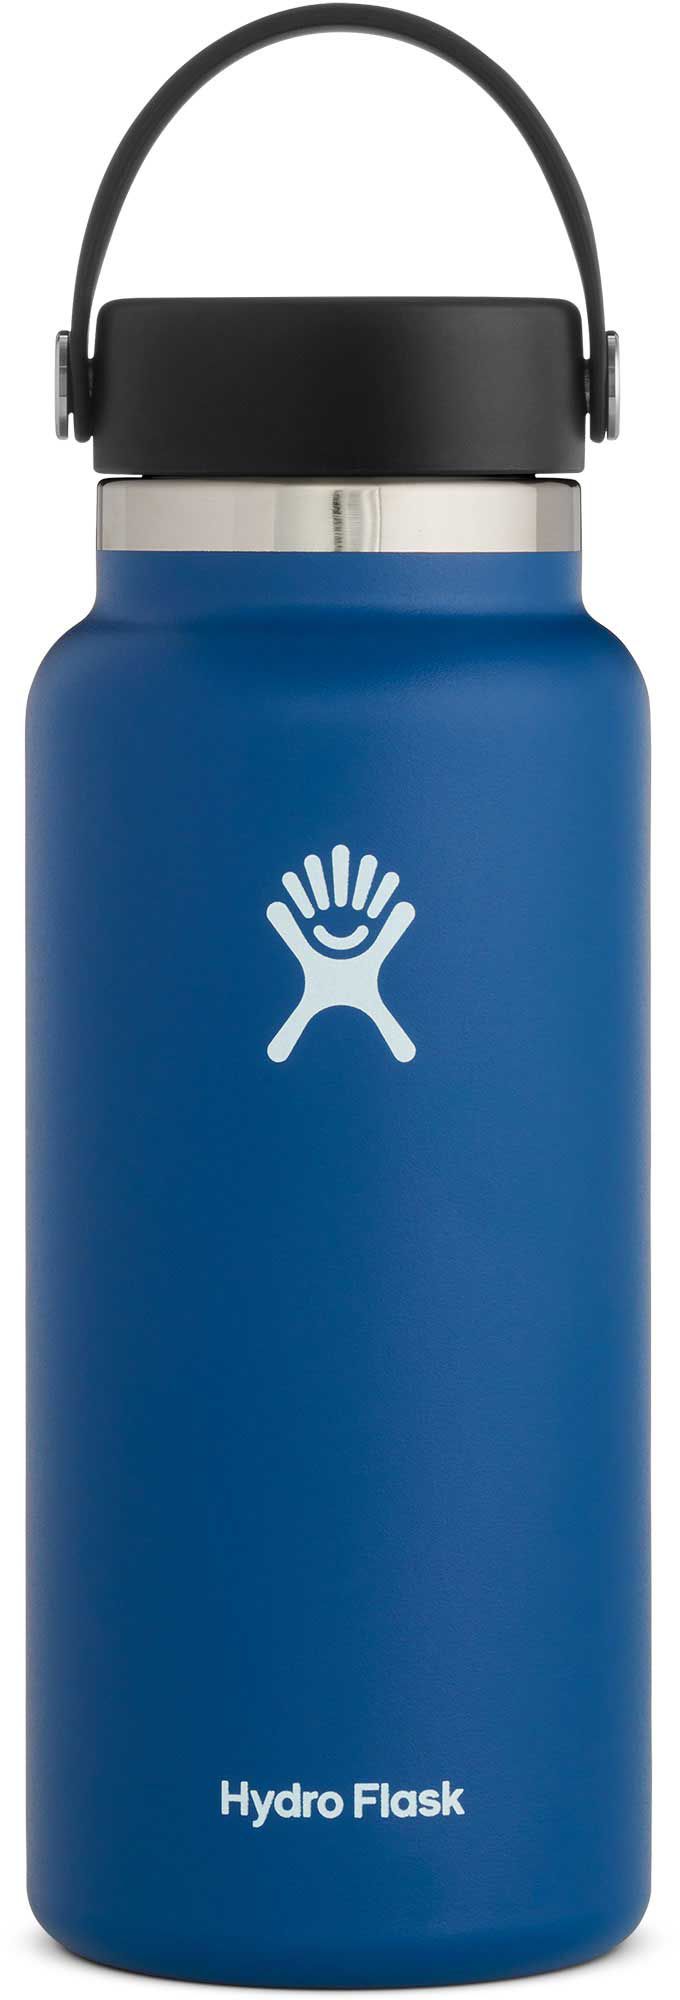 Hydro Flask Movement Collection Flash Sales, 55% OFF | www ...